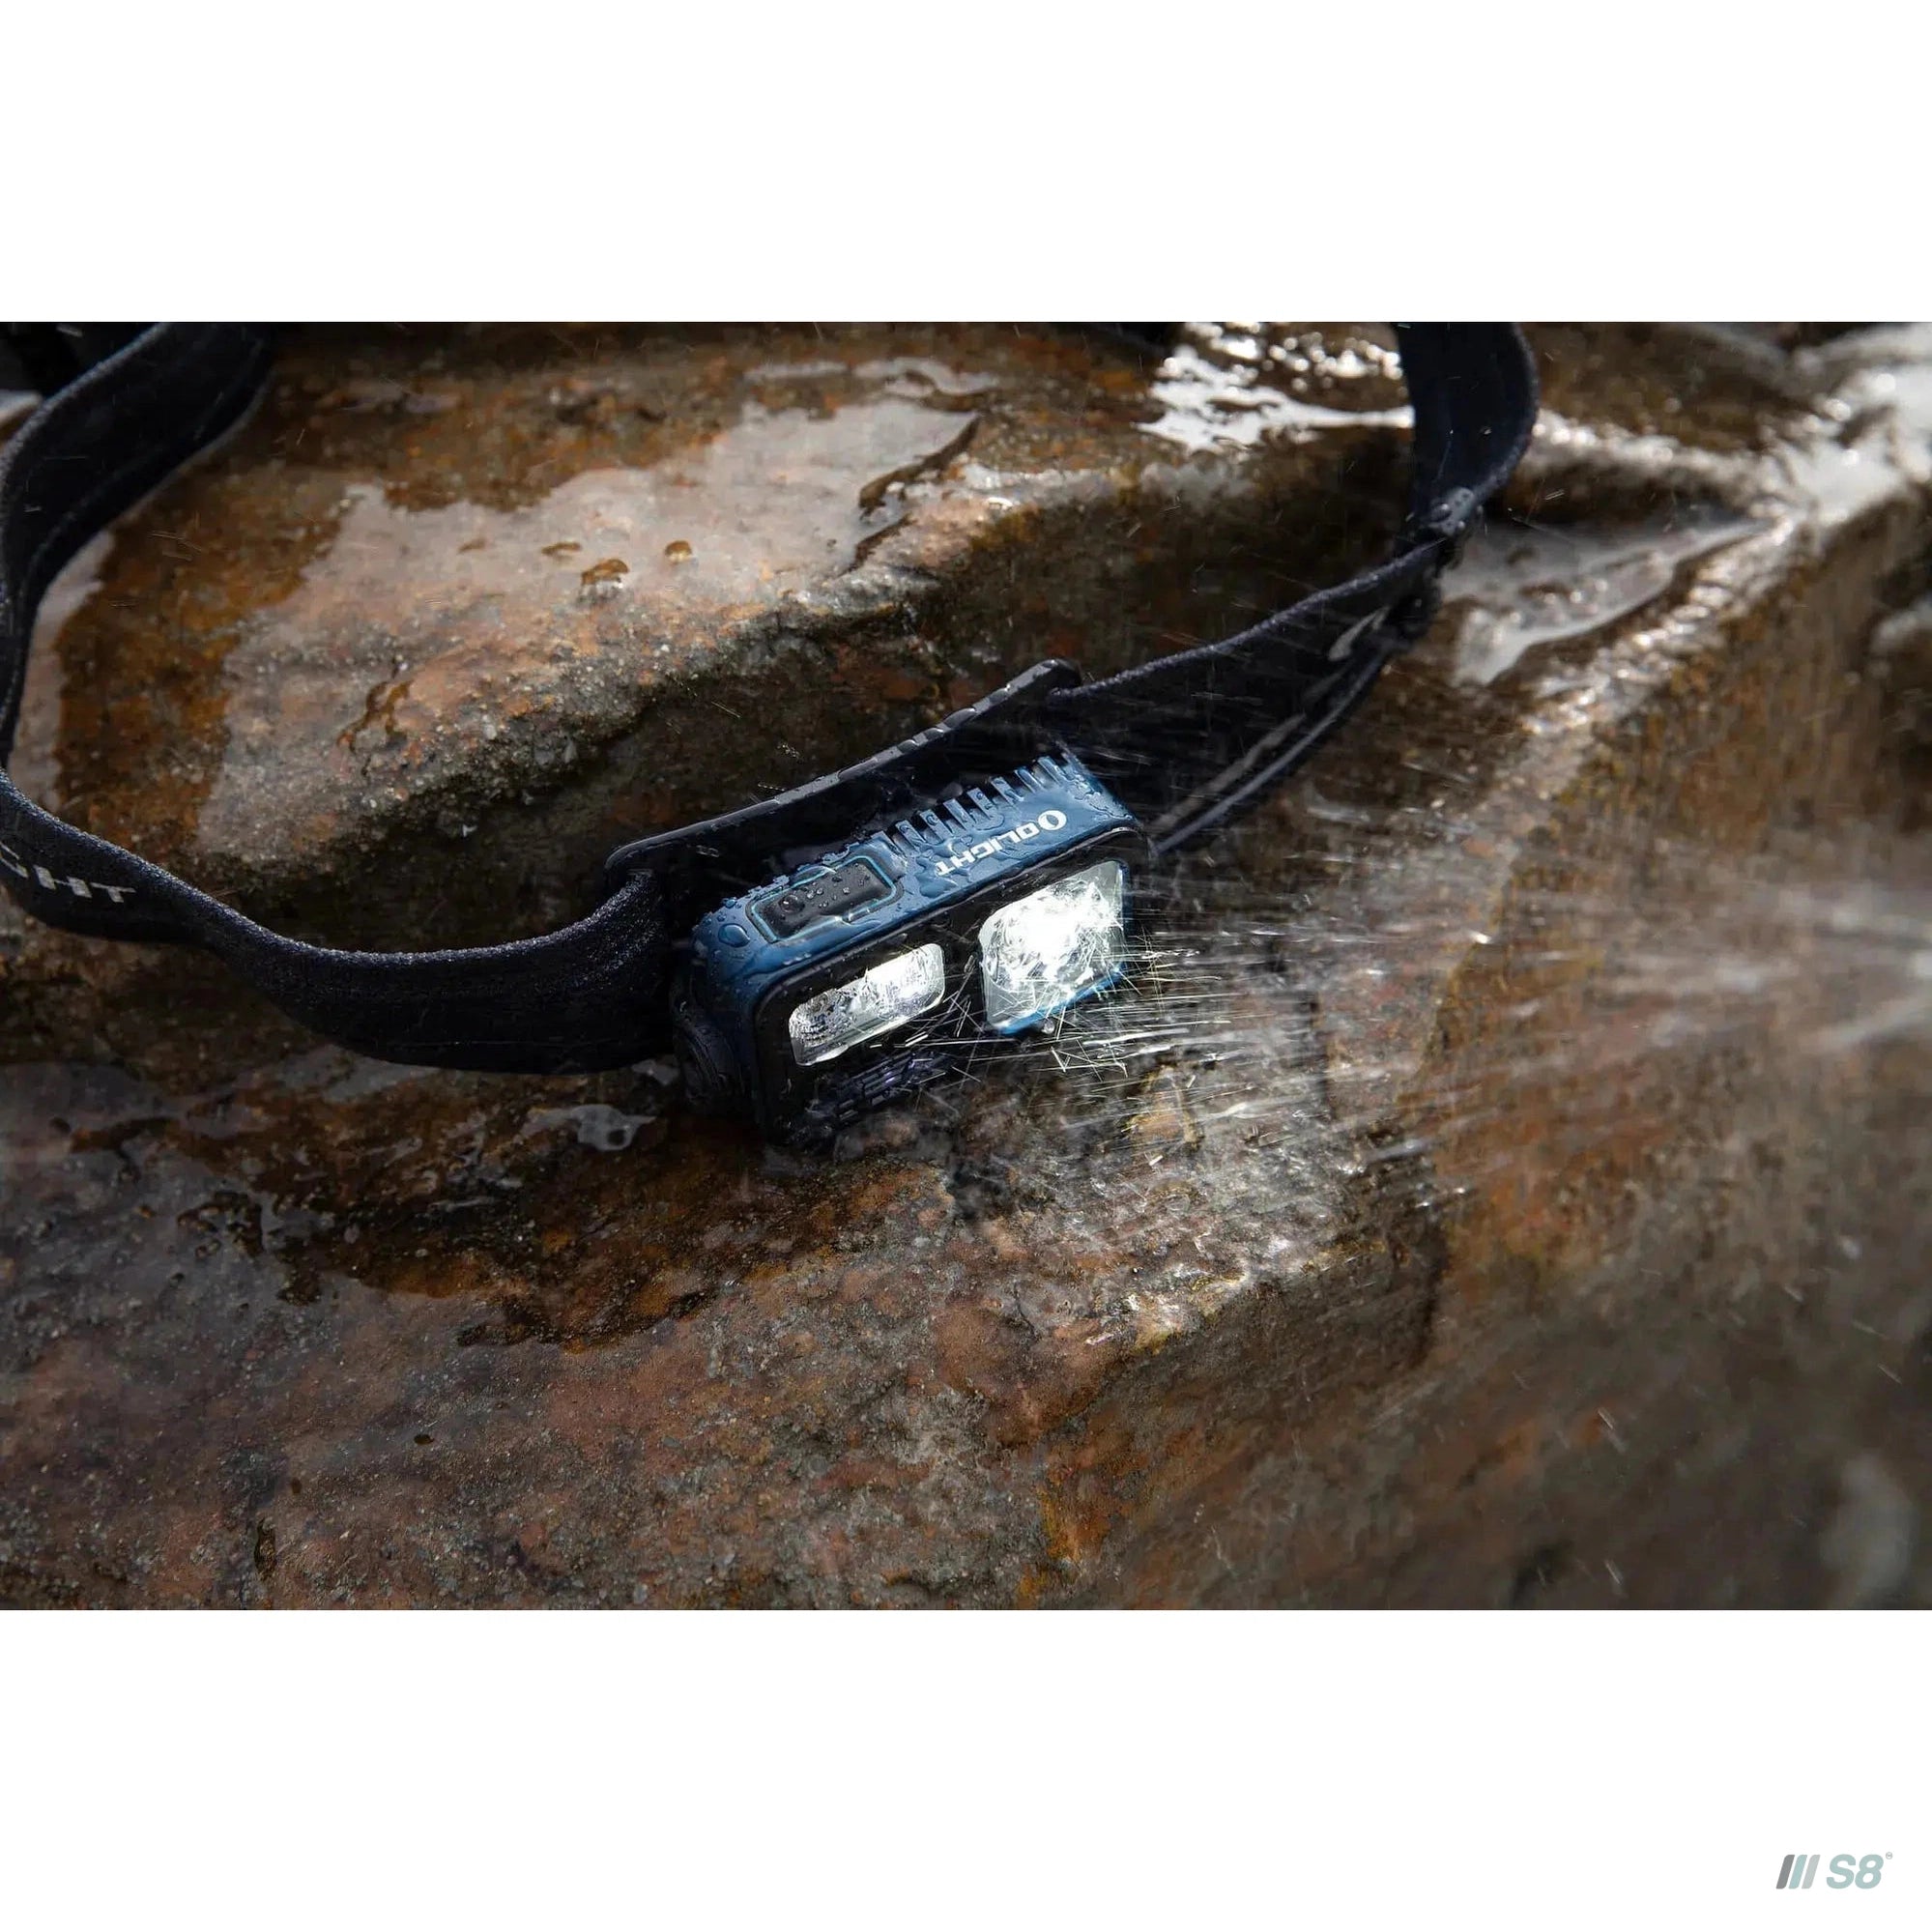 Array 2S USB Rechargeable LED Headlamp1000 Lumens-Olight-S8 Products Group